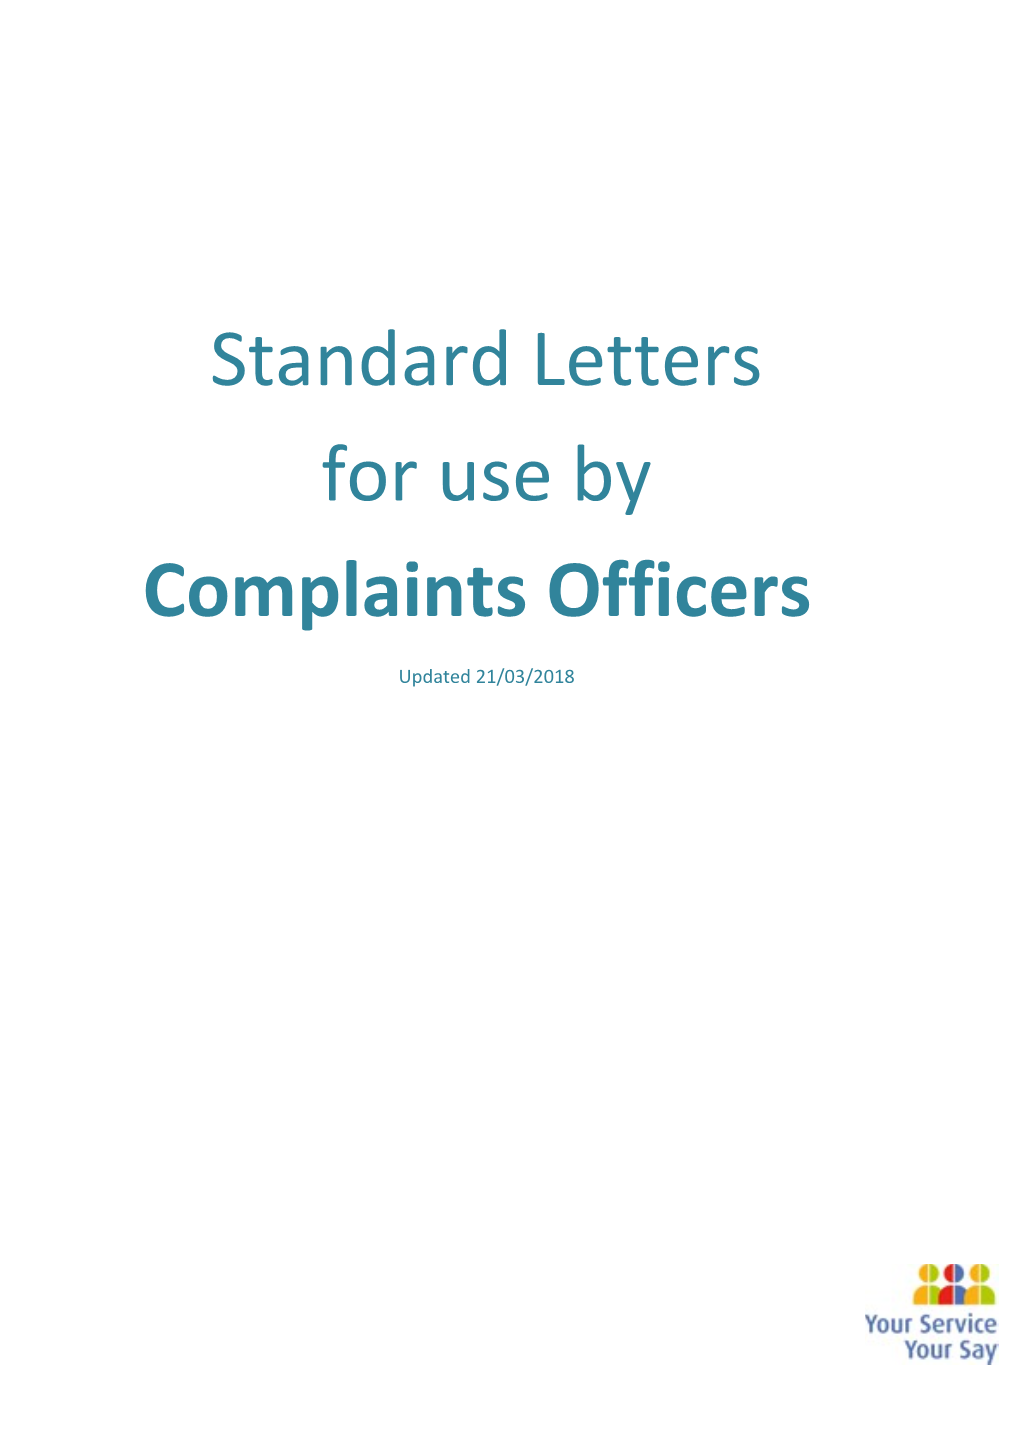 Standard Letters for Use by Complaints Officers